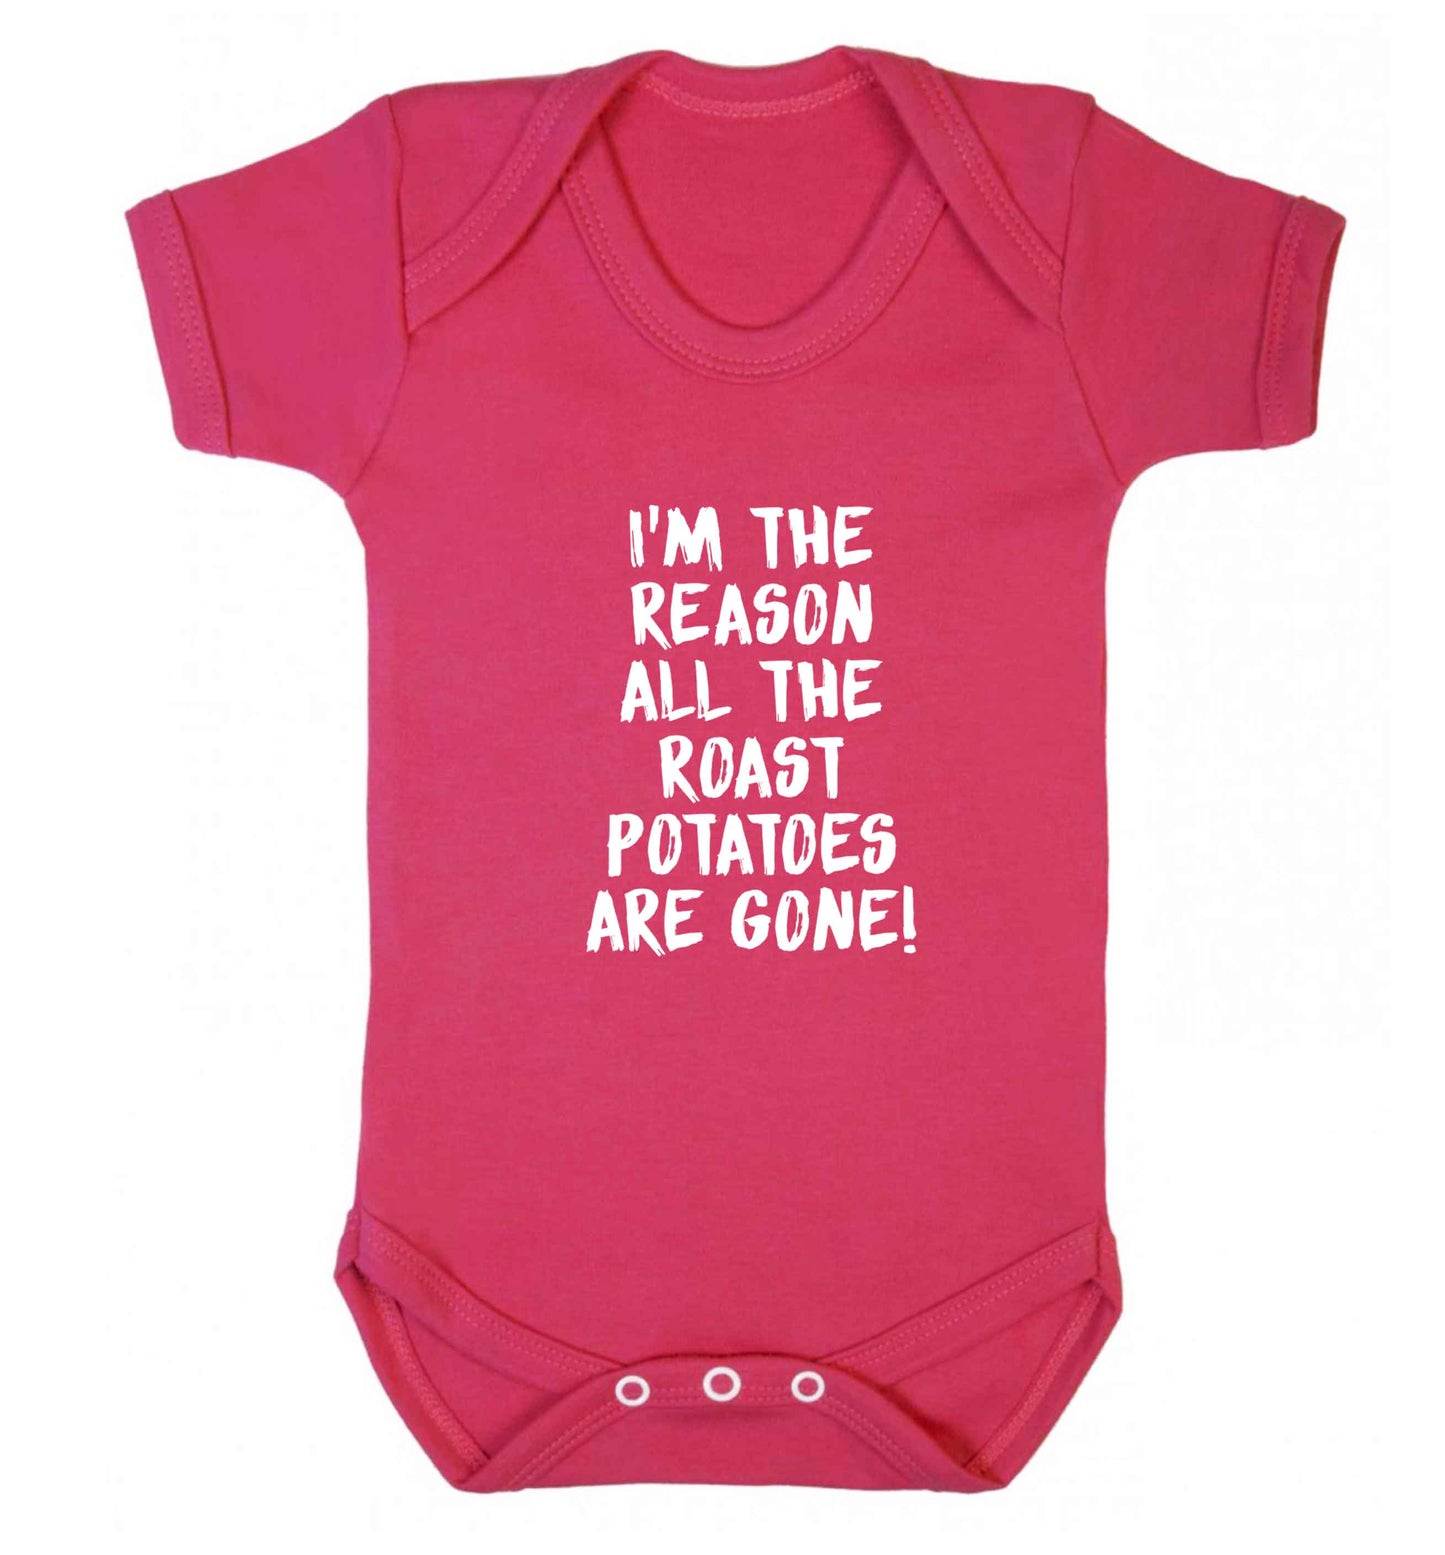 I'm the reason all the roast potatoes are gone baby vest dark pink 18-24 months